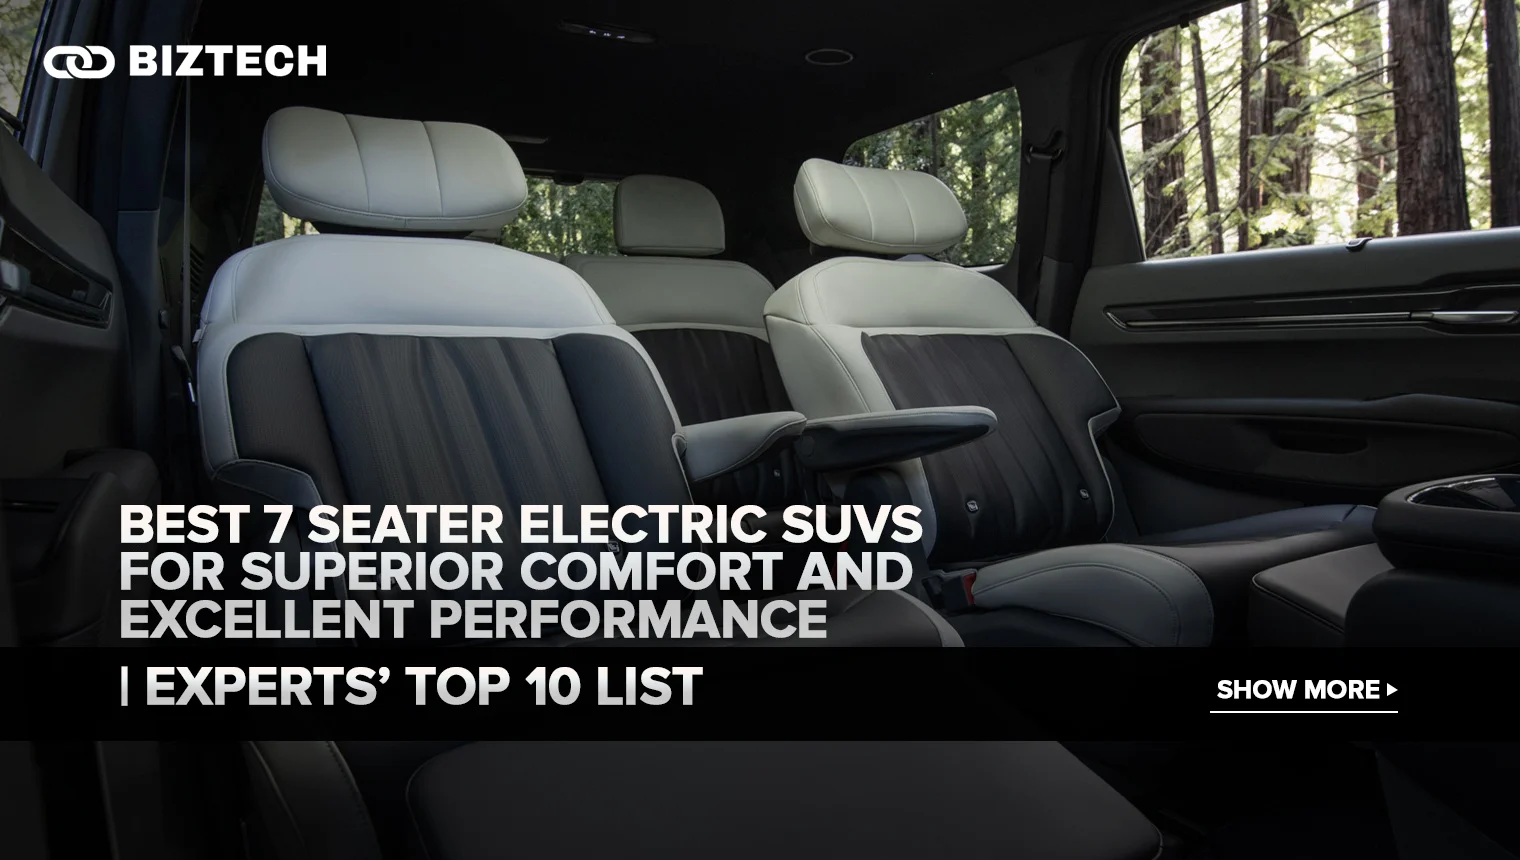 Best 7 Seater Electric SUVs for Superior Comfort and Excellent Performance | Experts’ Top 10 List